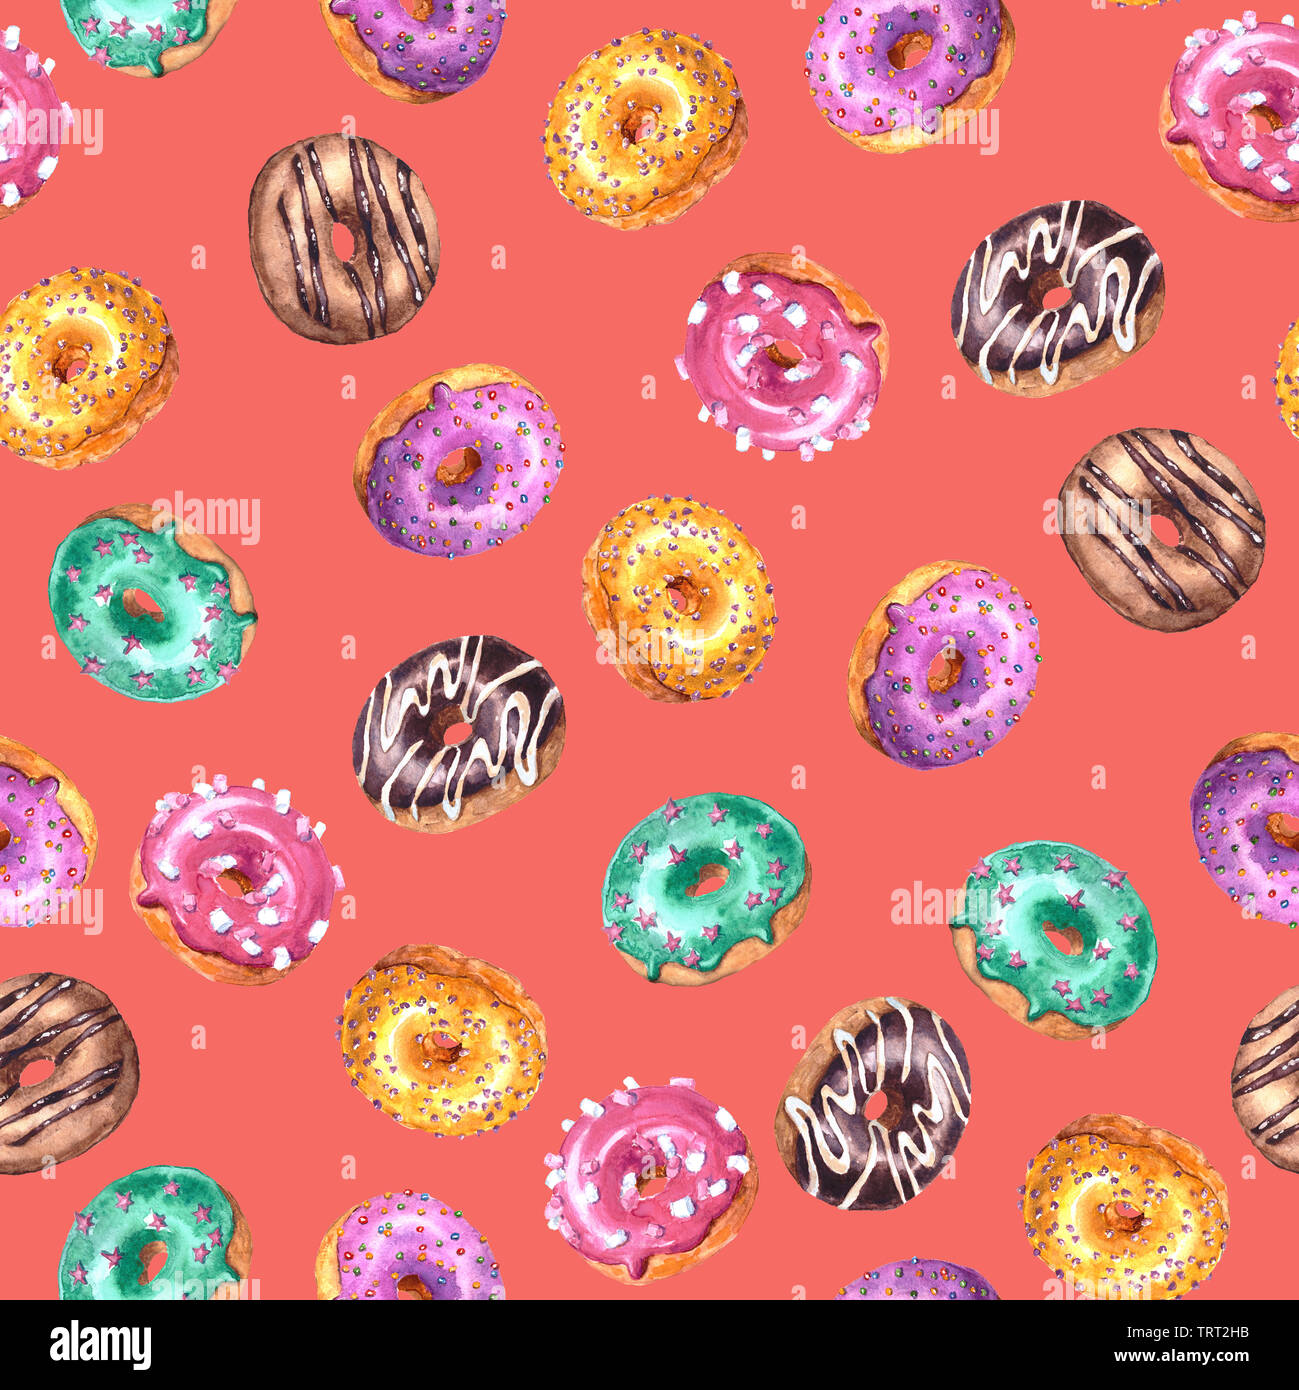 Set of watercolor hand drawn sketch illustration of colorful glazed donuts isolated on coral color background. Seamless pattern Stock Photo